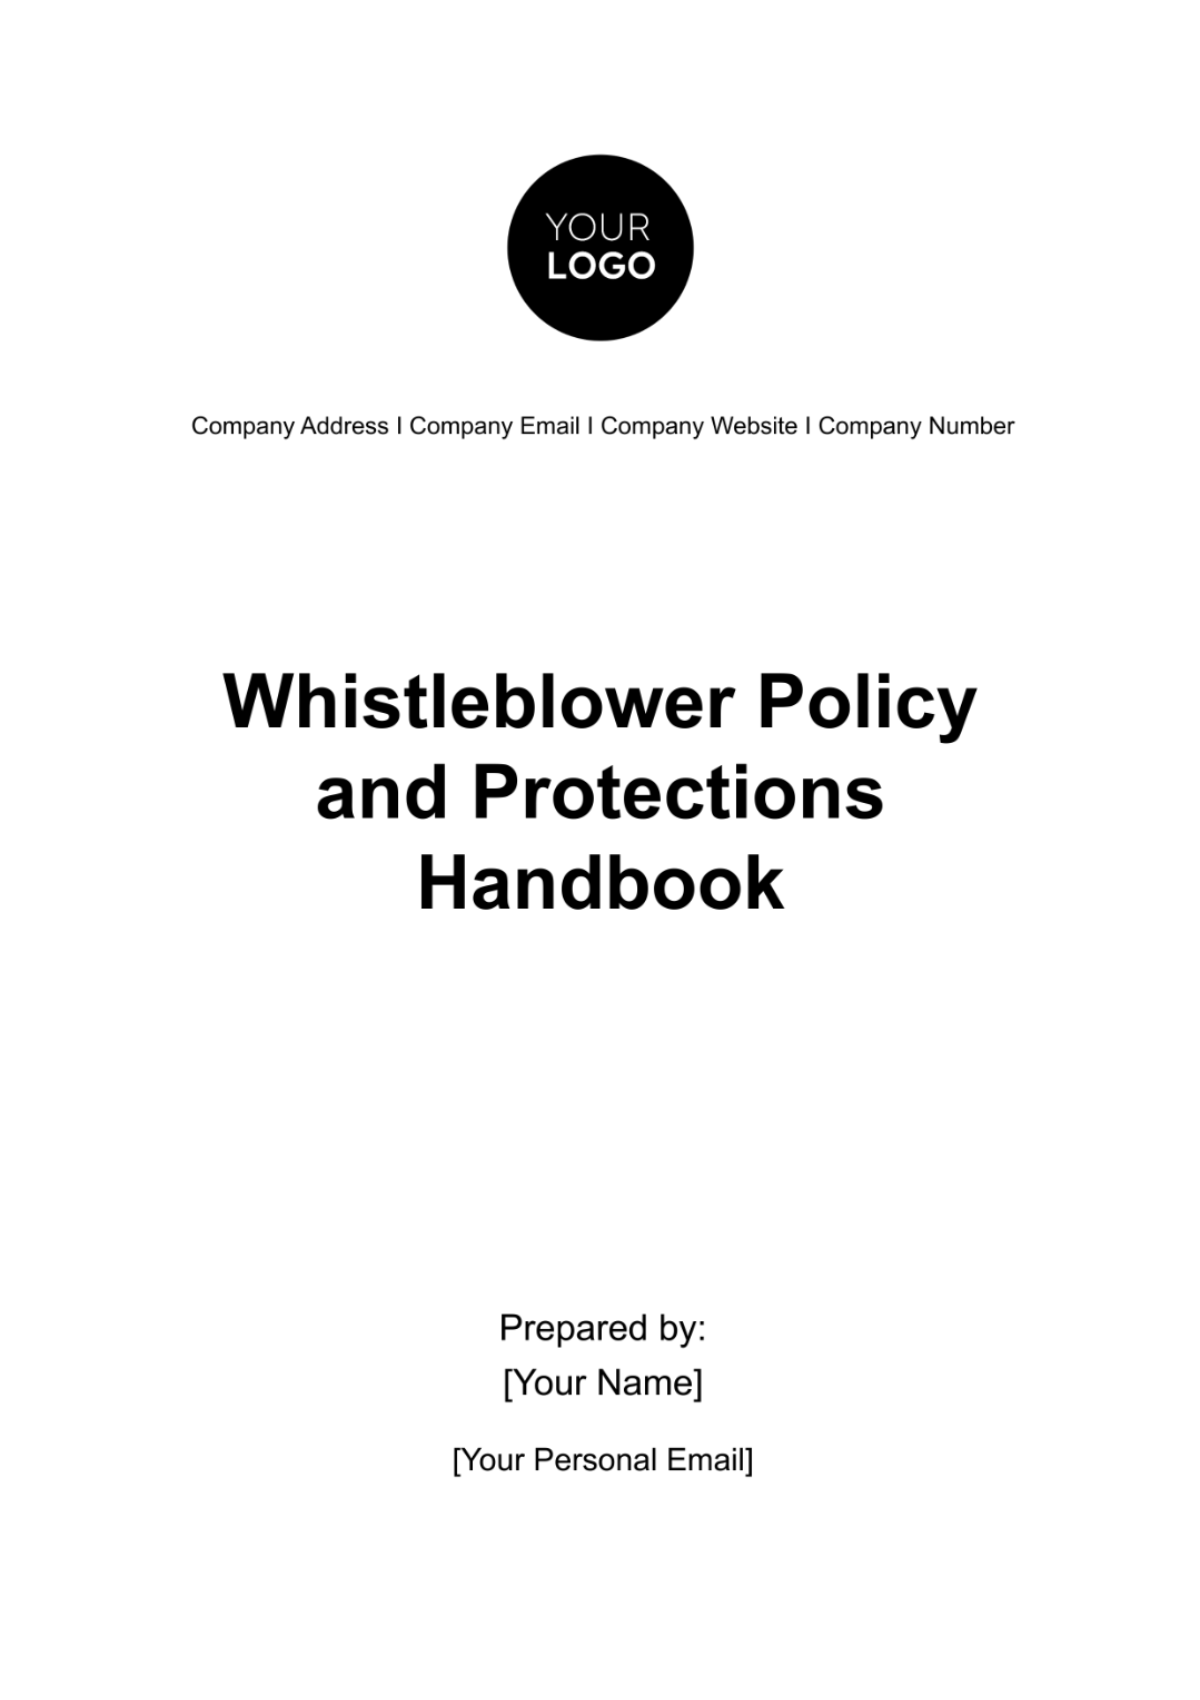 Free Whistleblower Policy and Protections Handbook HR Template